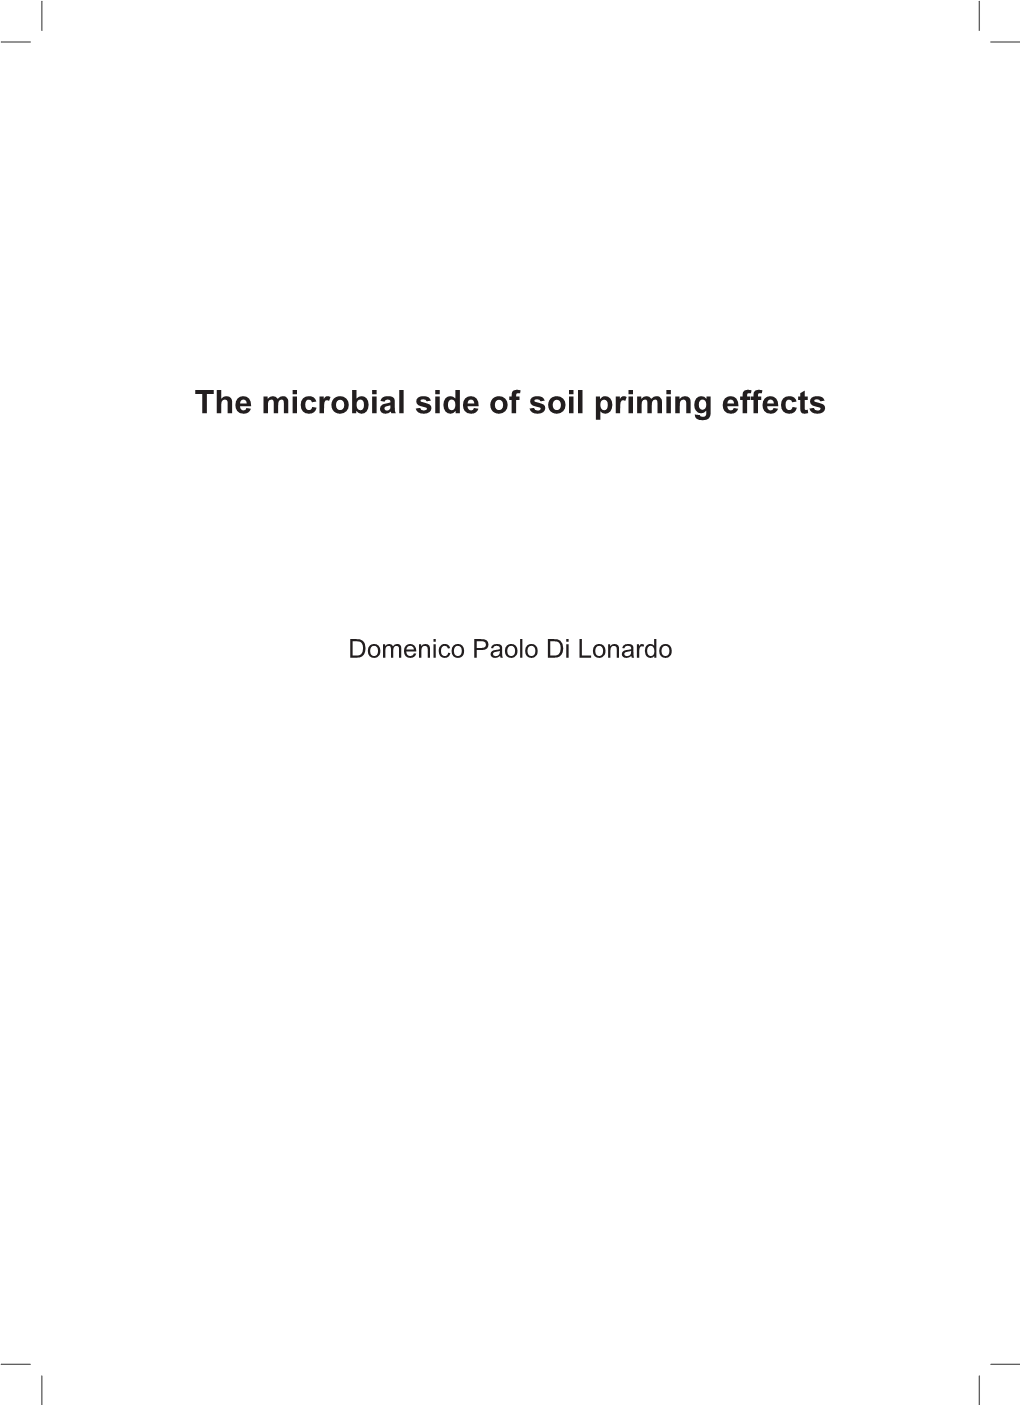 The Microbial Side of Soil Priming Effects